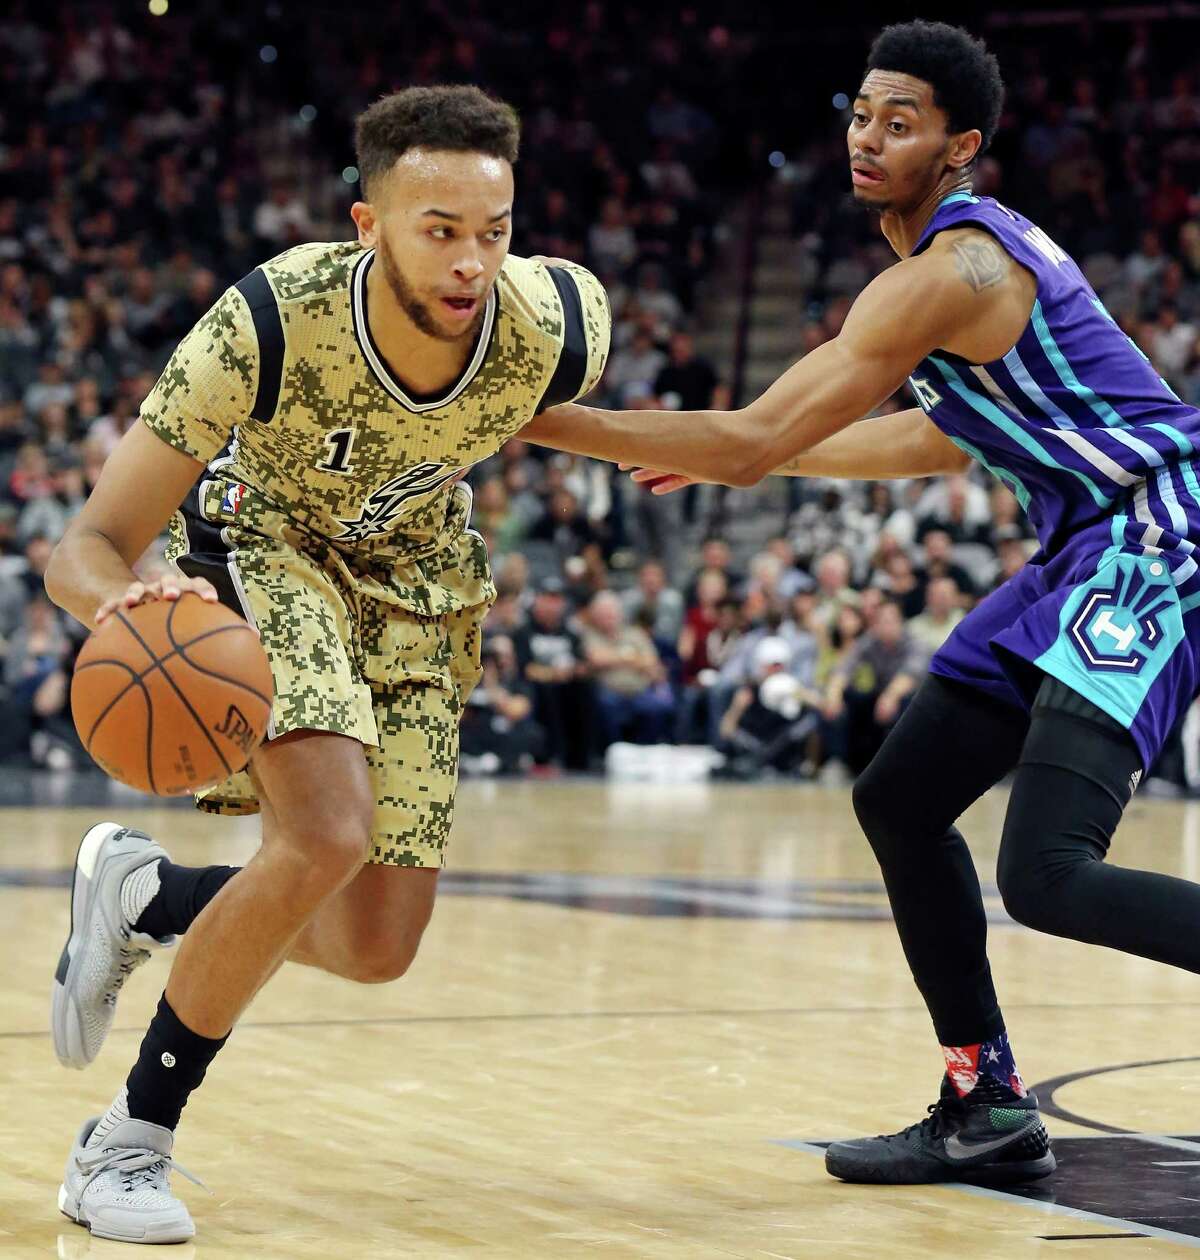 Spurs’ Kyle Anderson looks for room around the Charlotte Hornets’ Jeremy Lamb during second half action on Nov. 7, 2015 at the AT&T Center.